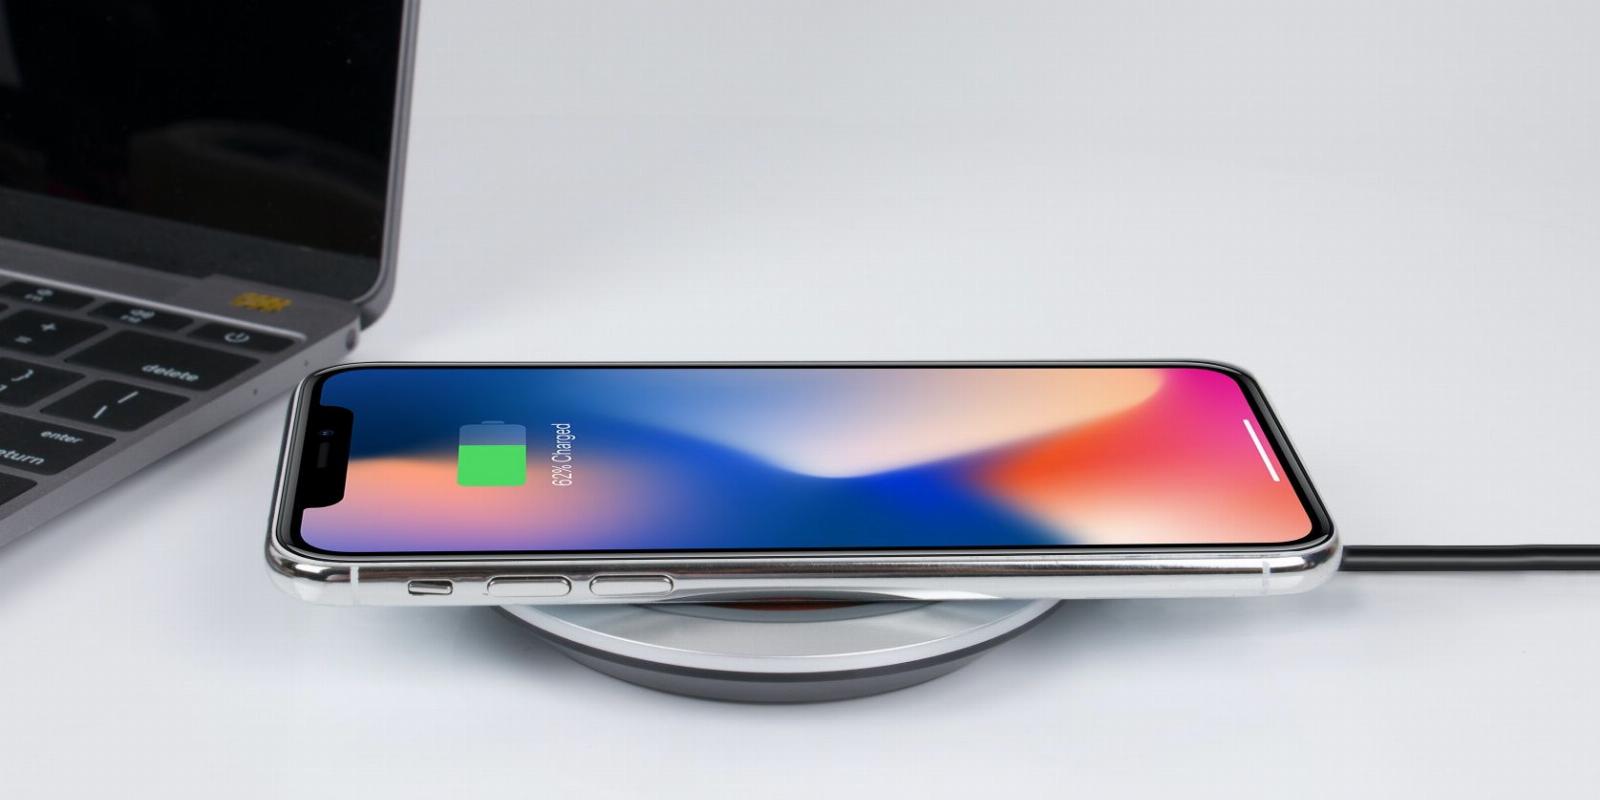 Will Qi2 Bring Apple’s MagSafe Wireless Charging Tech to Android Devices?